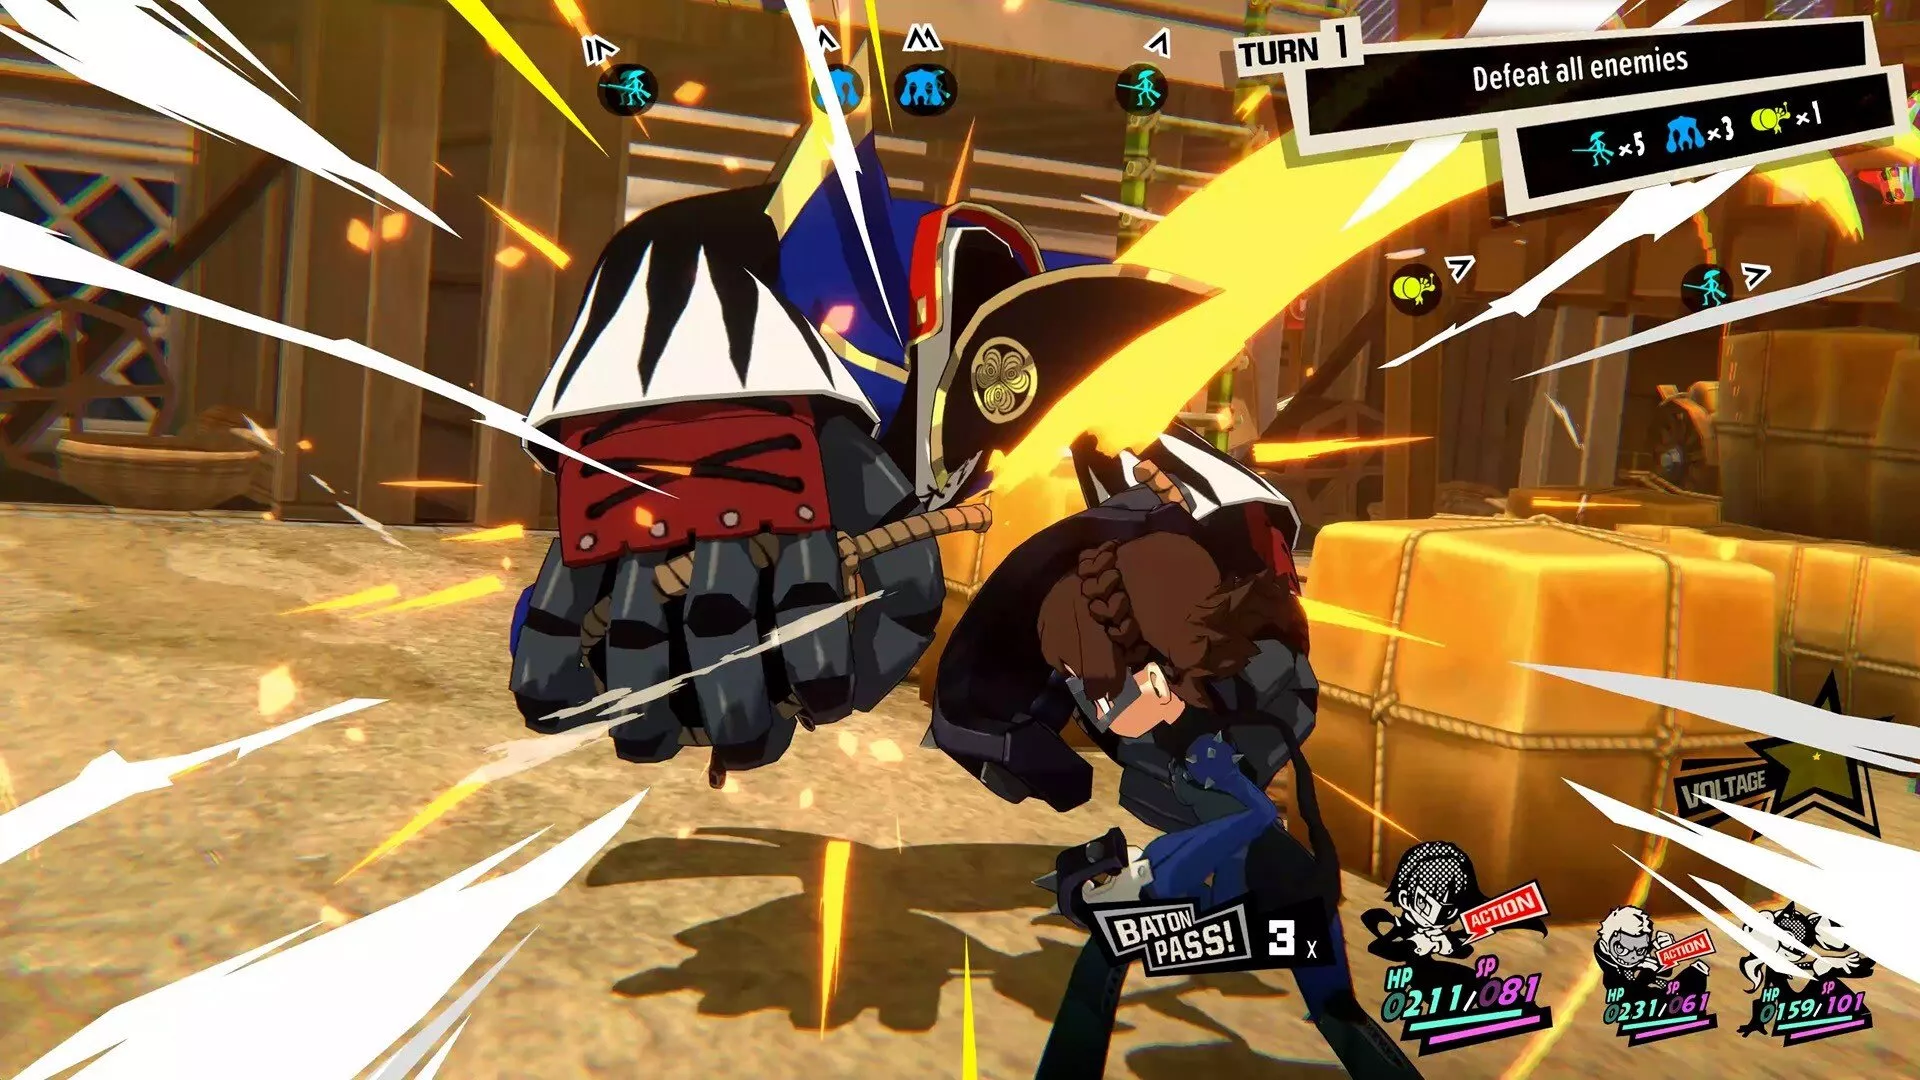 Persona 5 Tactica: A Tactical Turn-Based Adventure